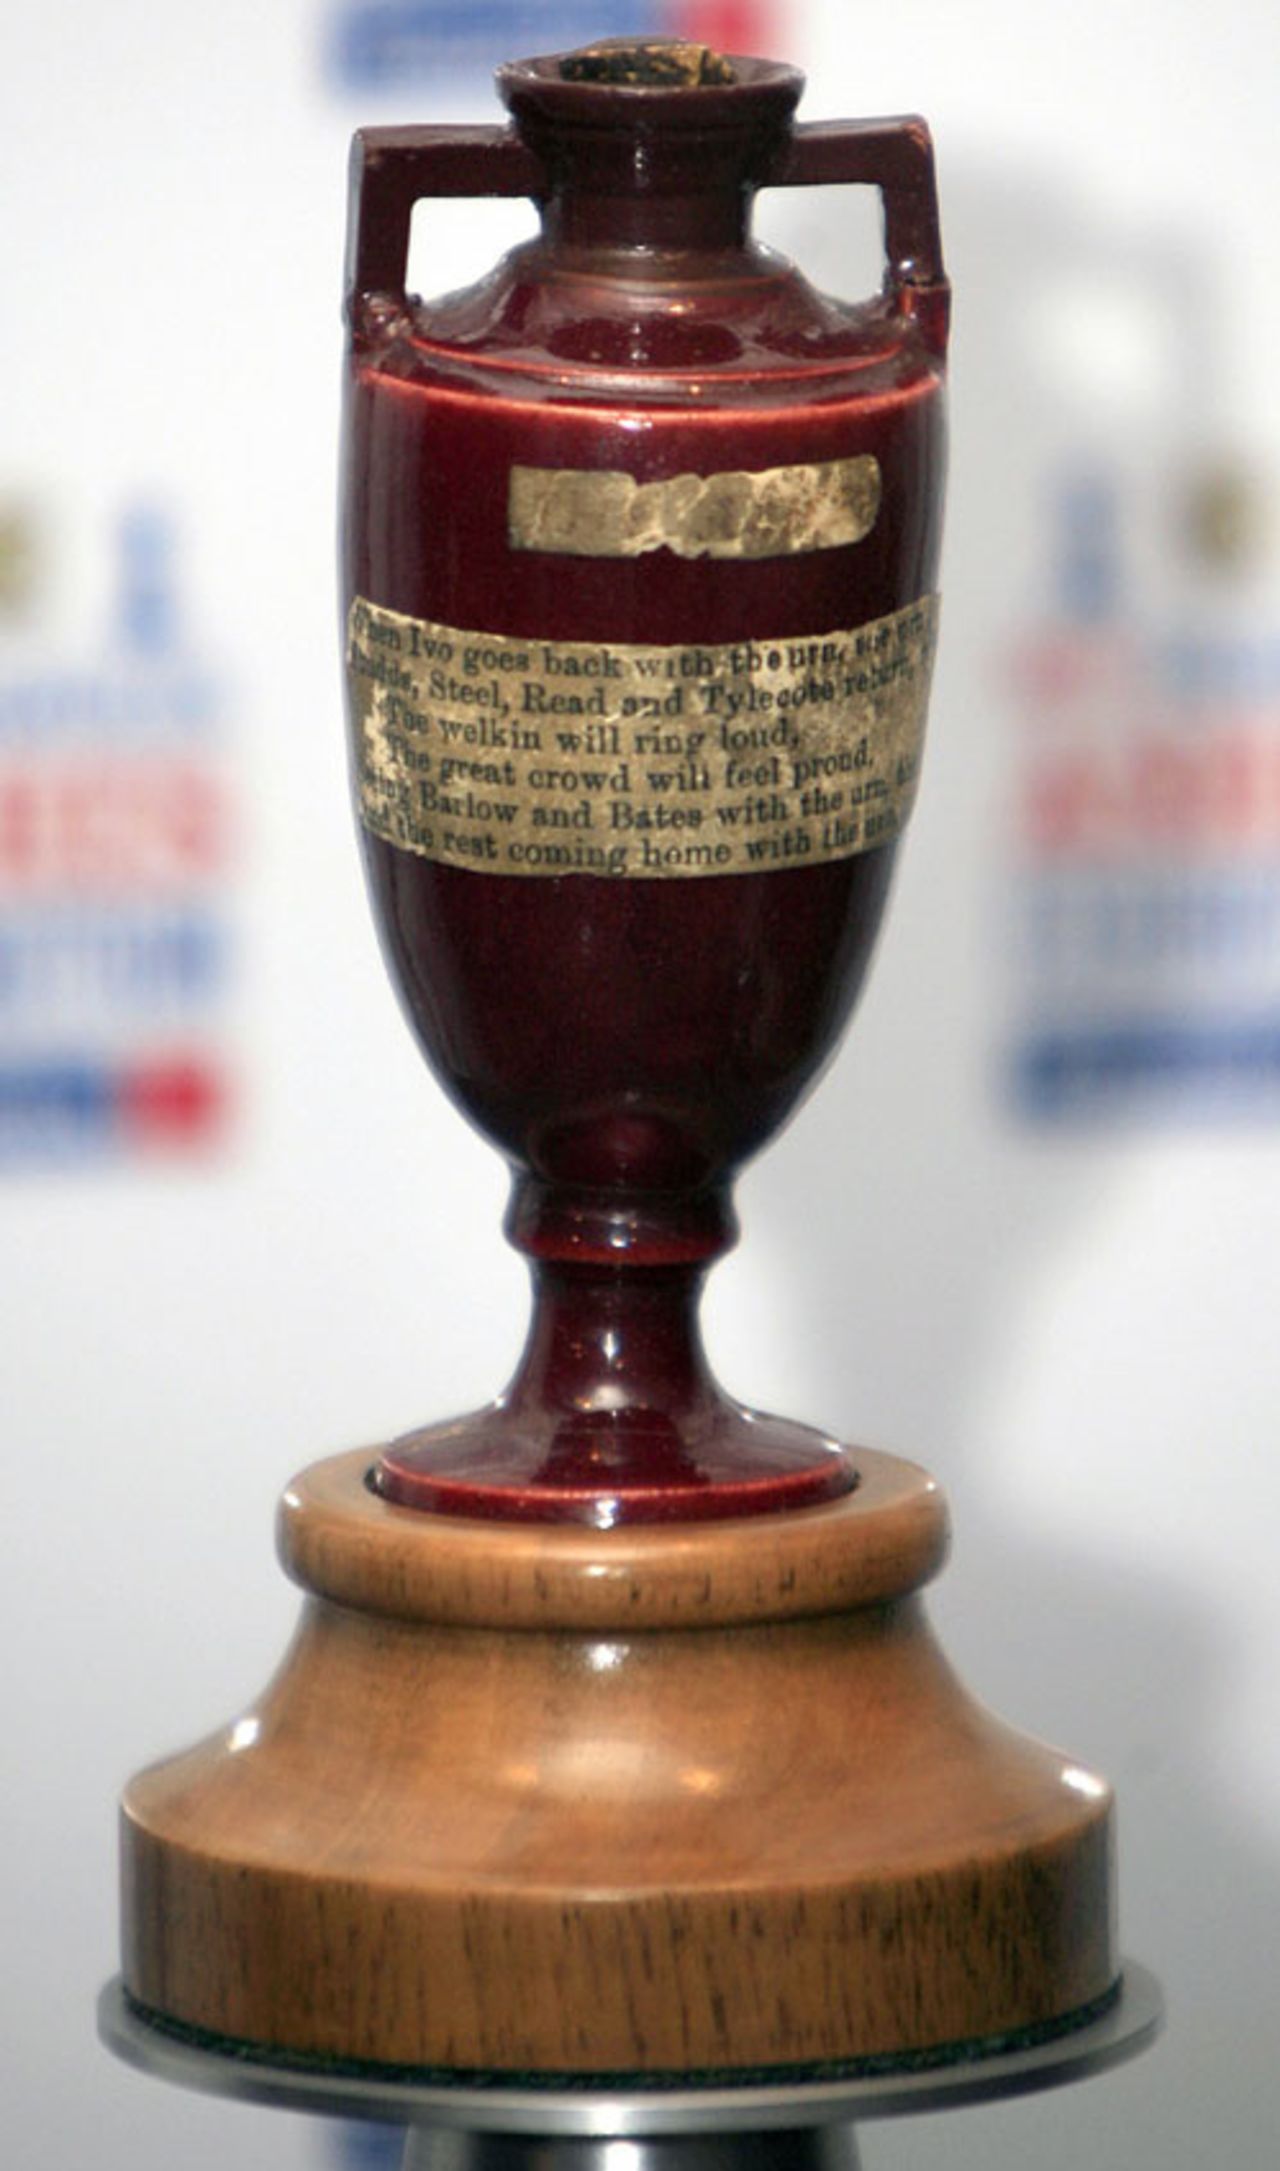 The original Ashes urn on display at the Museum of Sydney, Sydney, October 20, 2006